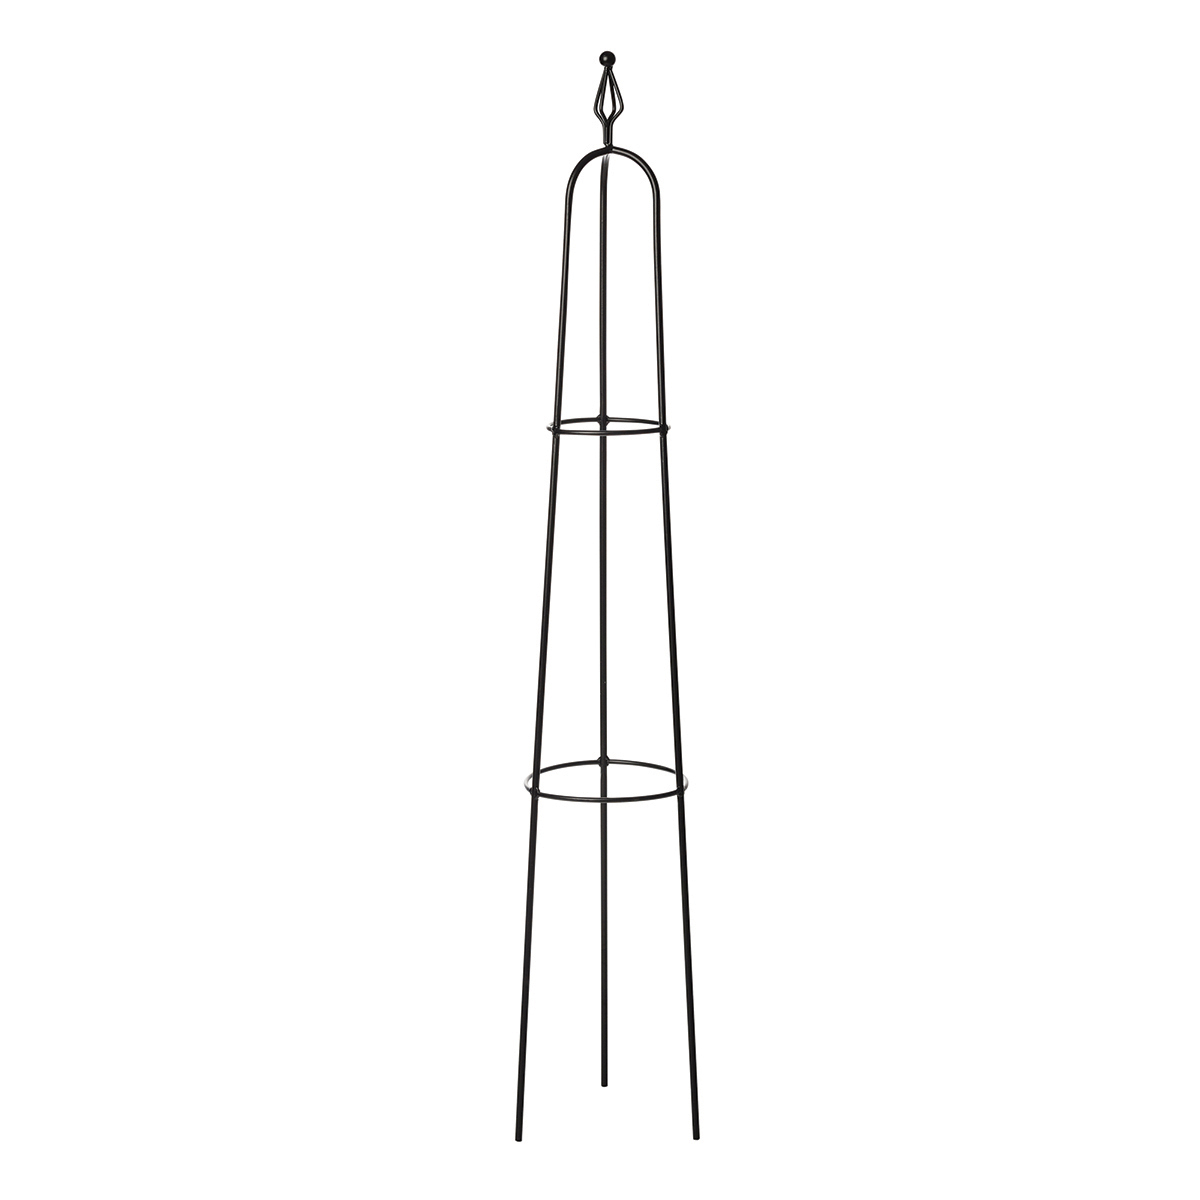 Picture of Burghley Obelisk 59"H X 9" Diameter